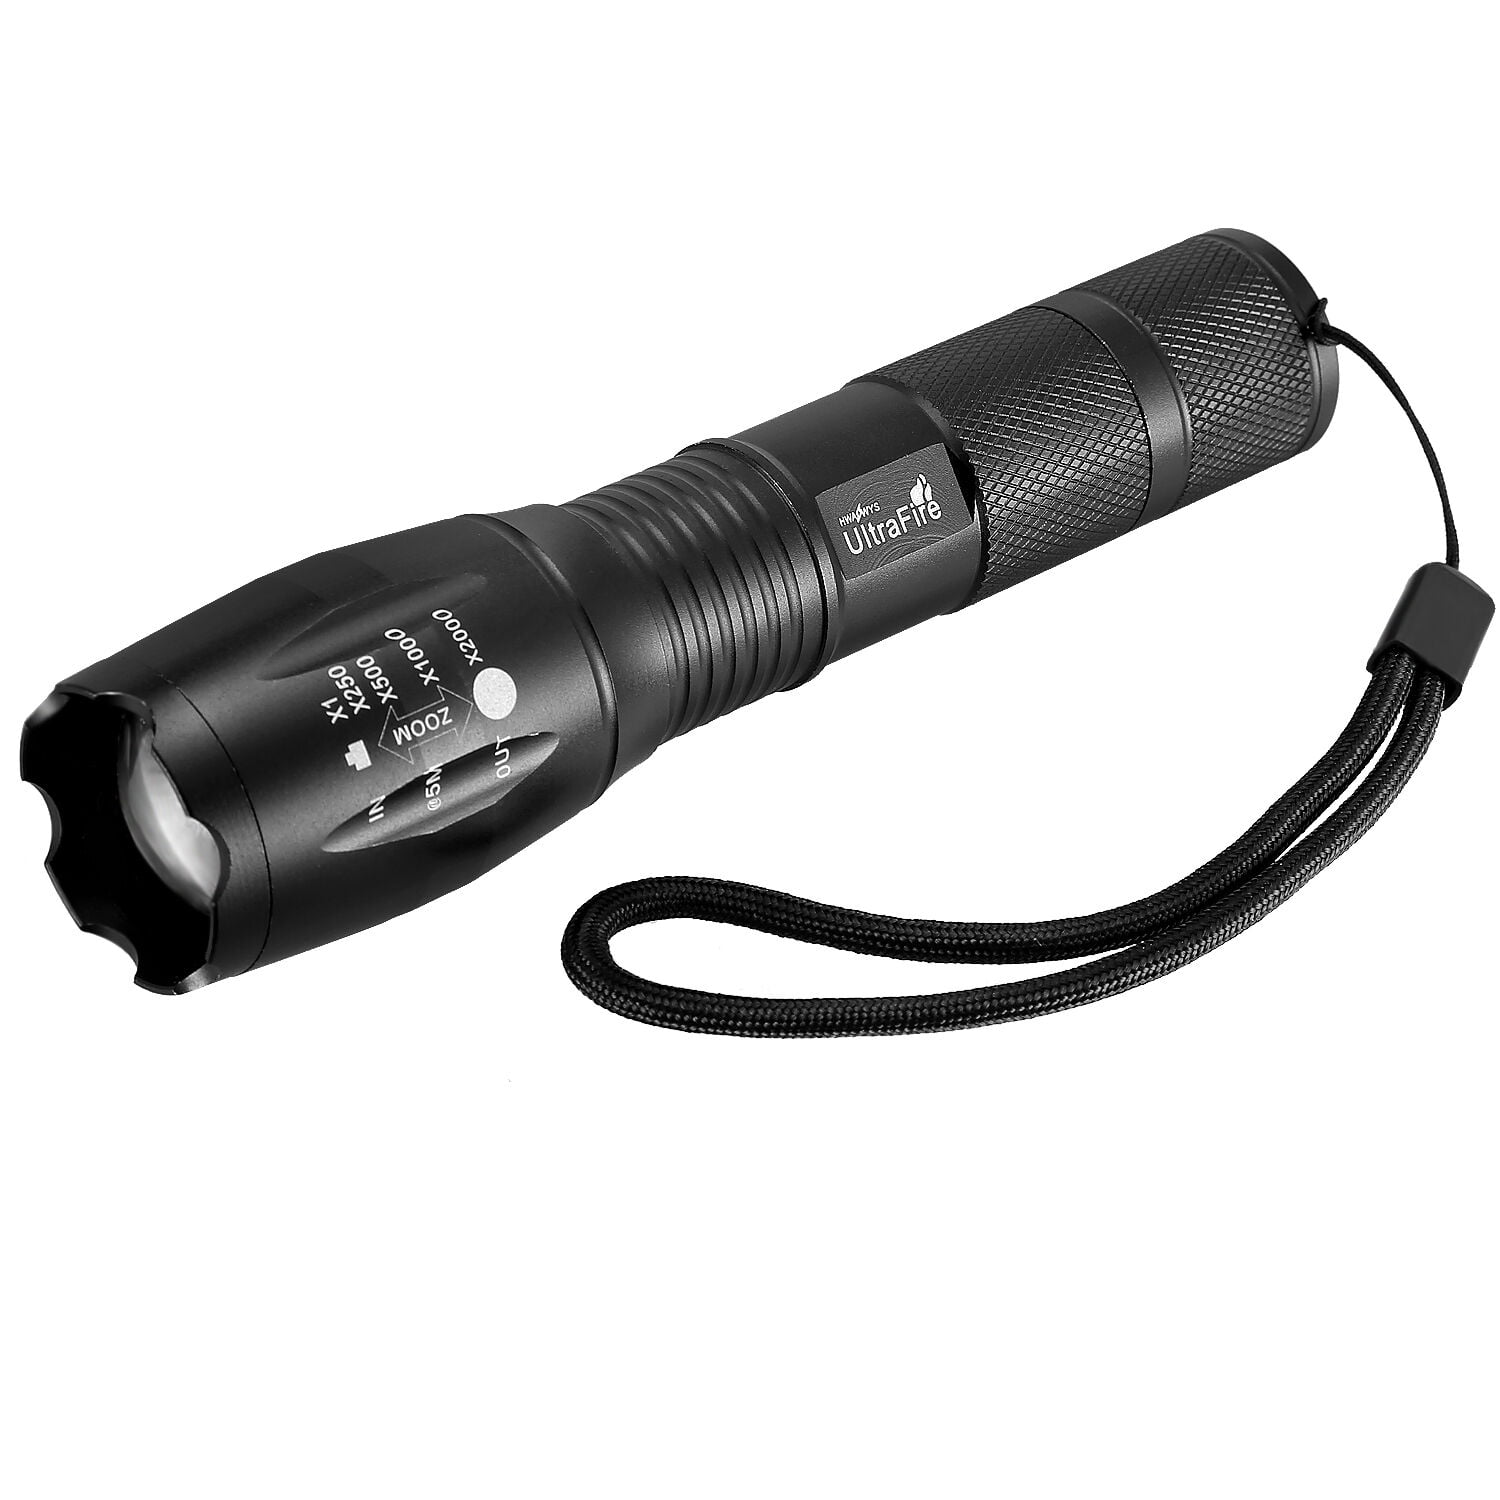 3 x Tactical 18650 Flashlight Ultrafire T6 High Powered 5Modes Zoomable Aluminum 